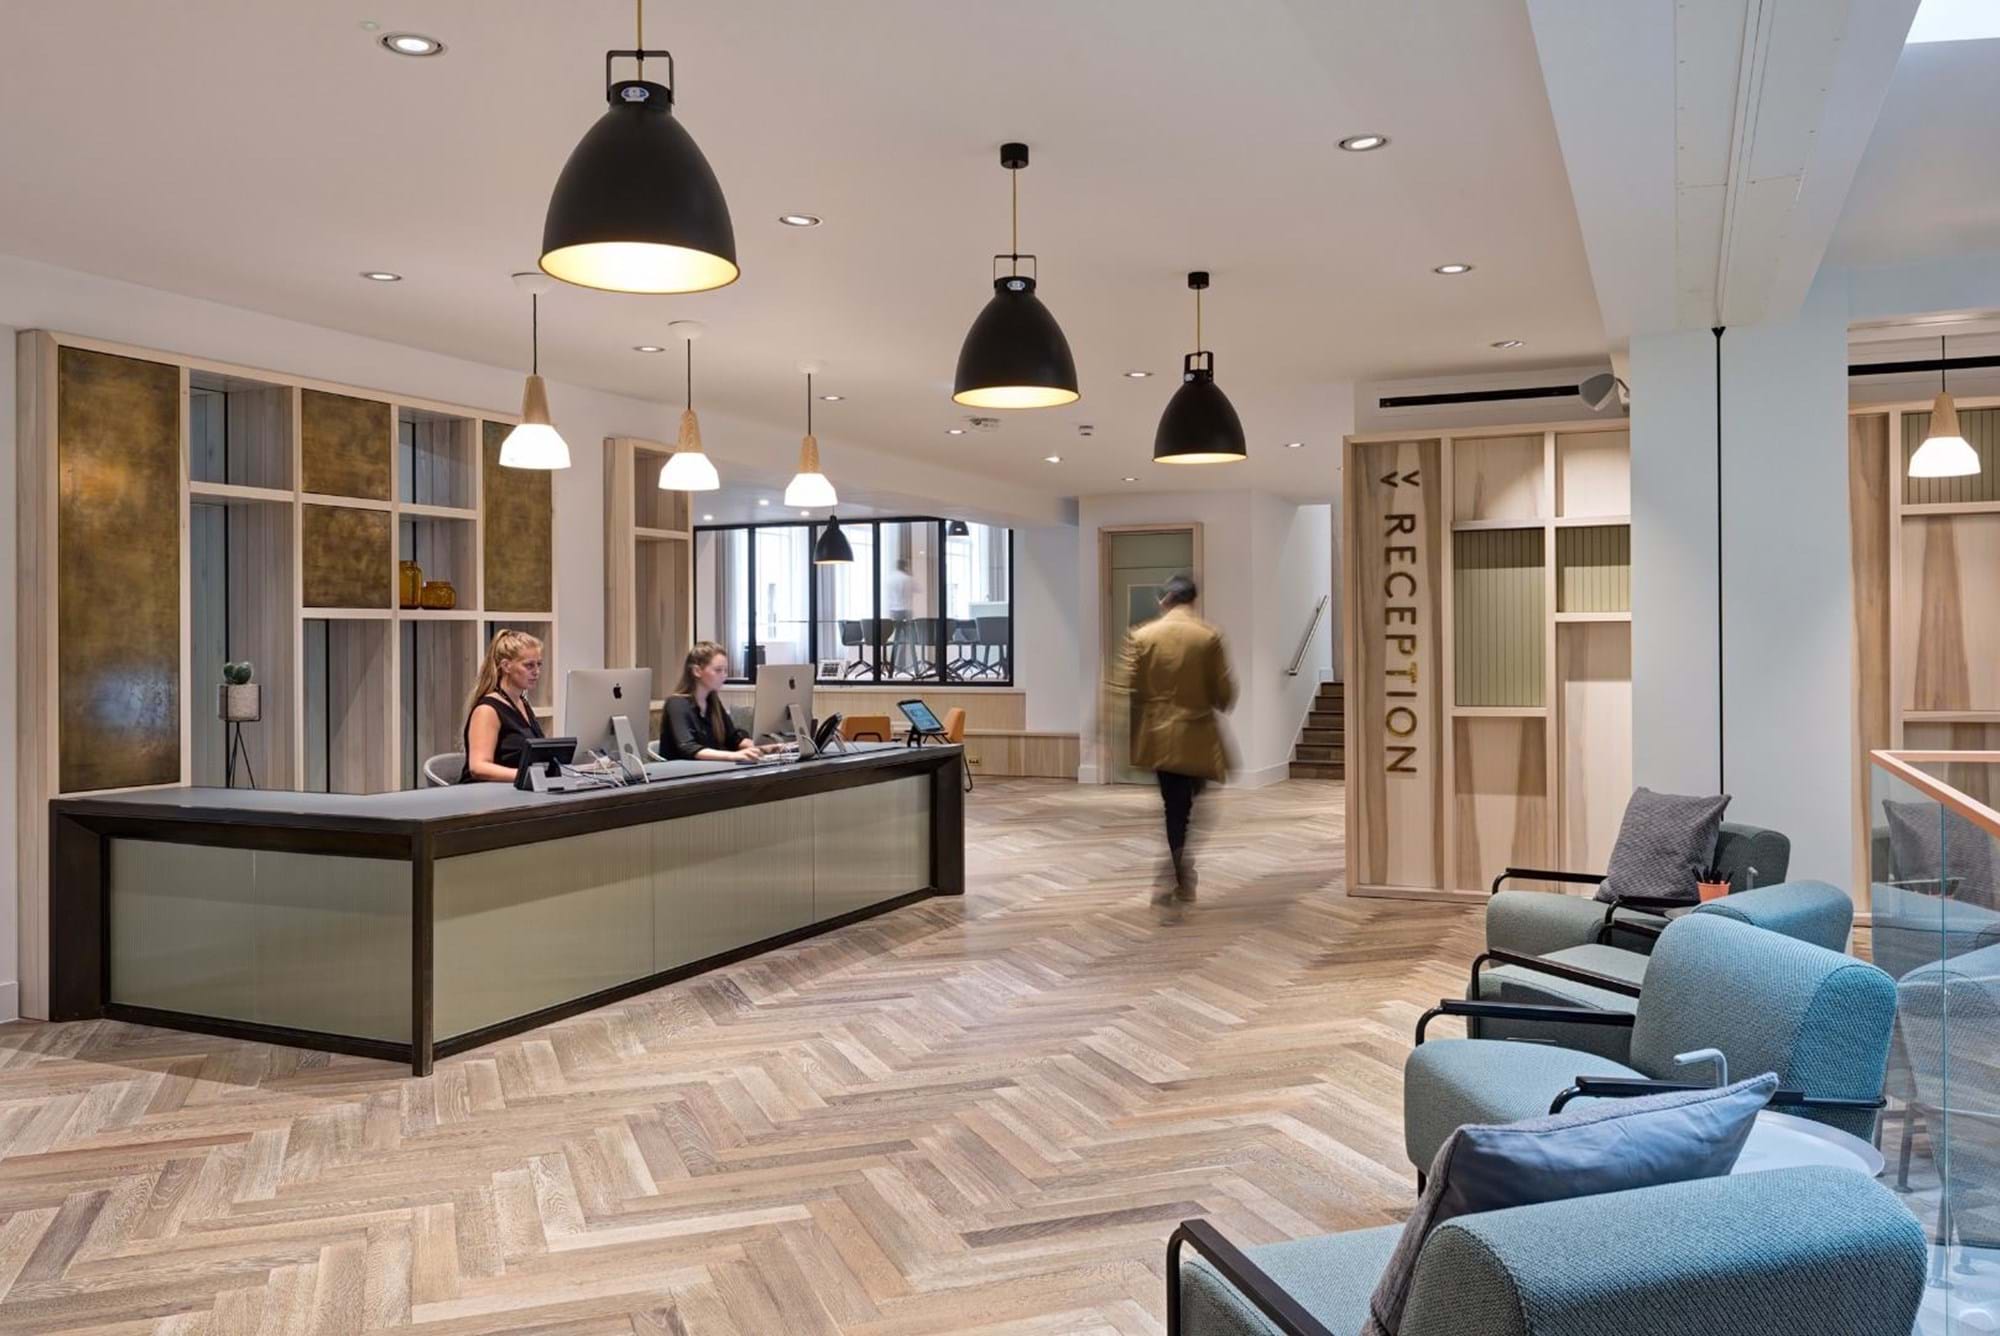 Modus Workspace office design, fit out and refurbishment - TOG - Wimpole Street - TOG Wimpole St 07 highres sRGB.jpg